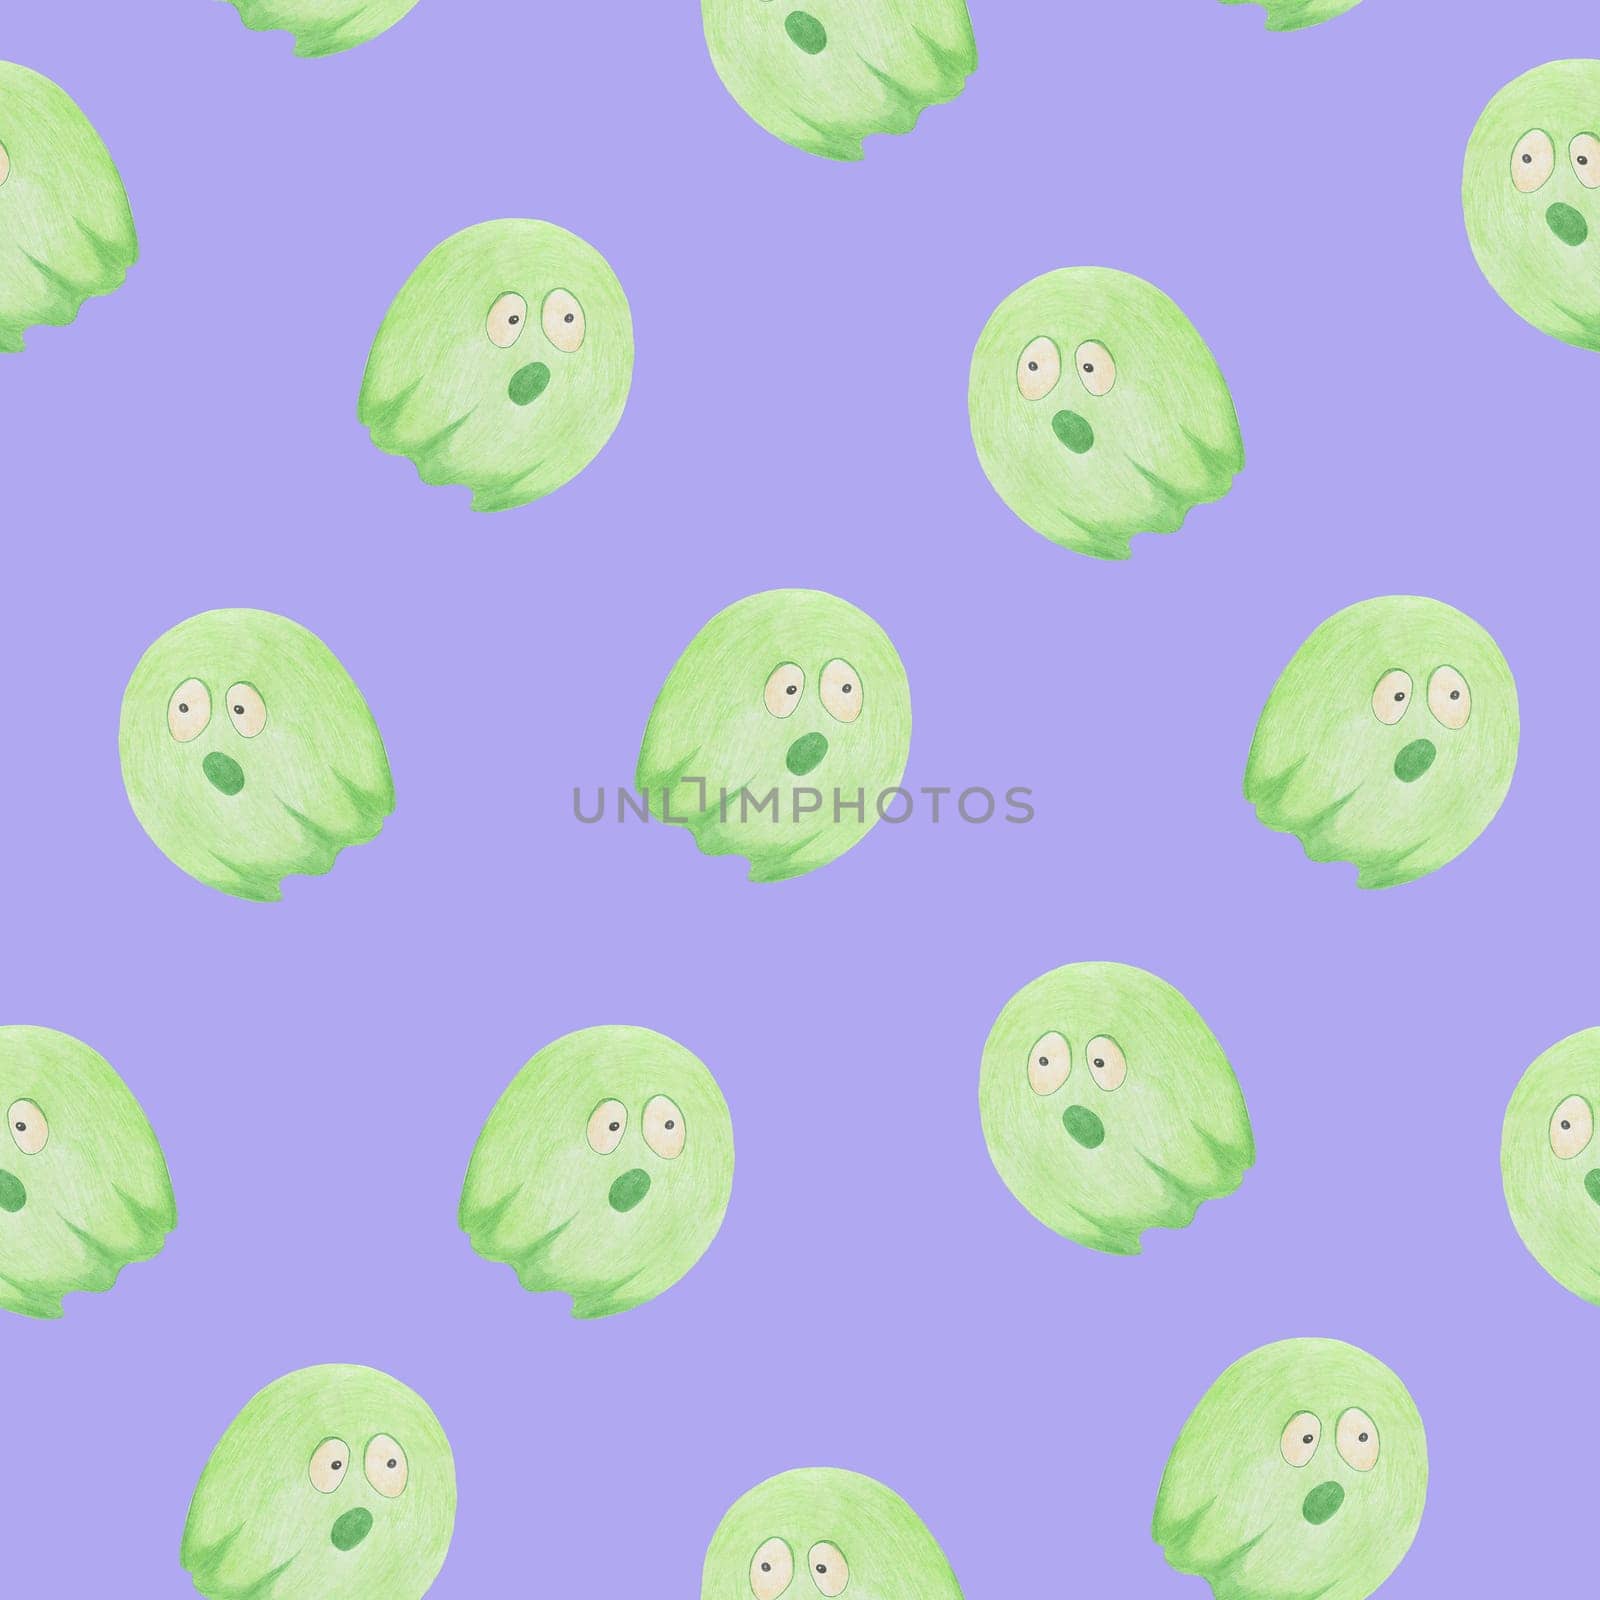 Hand Drawn Halloween Background. Halloween Seamless Pattern with Ghosts Drawn by Colored Pencils.